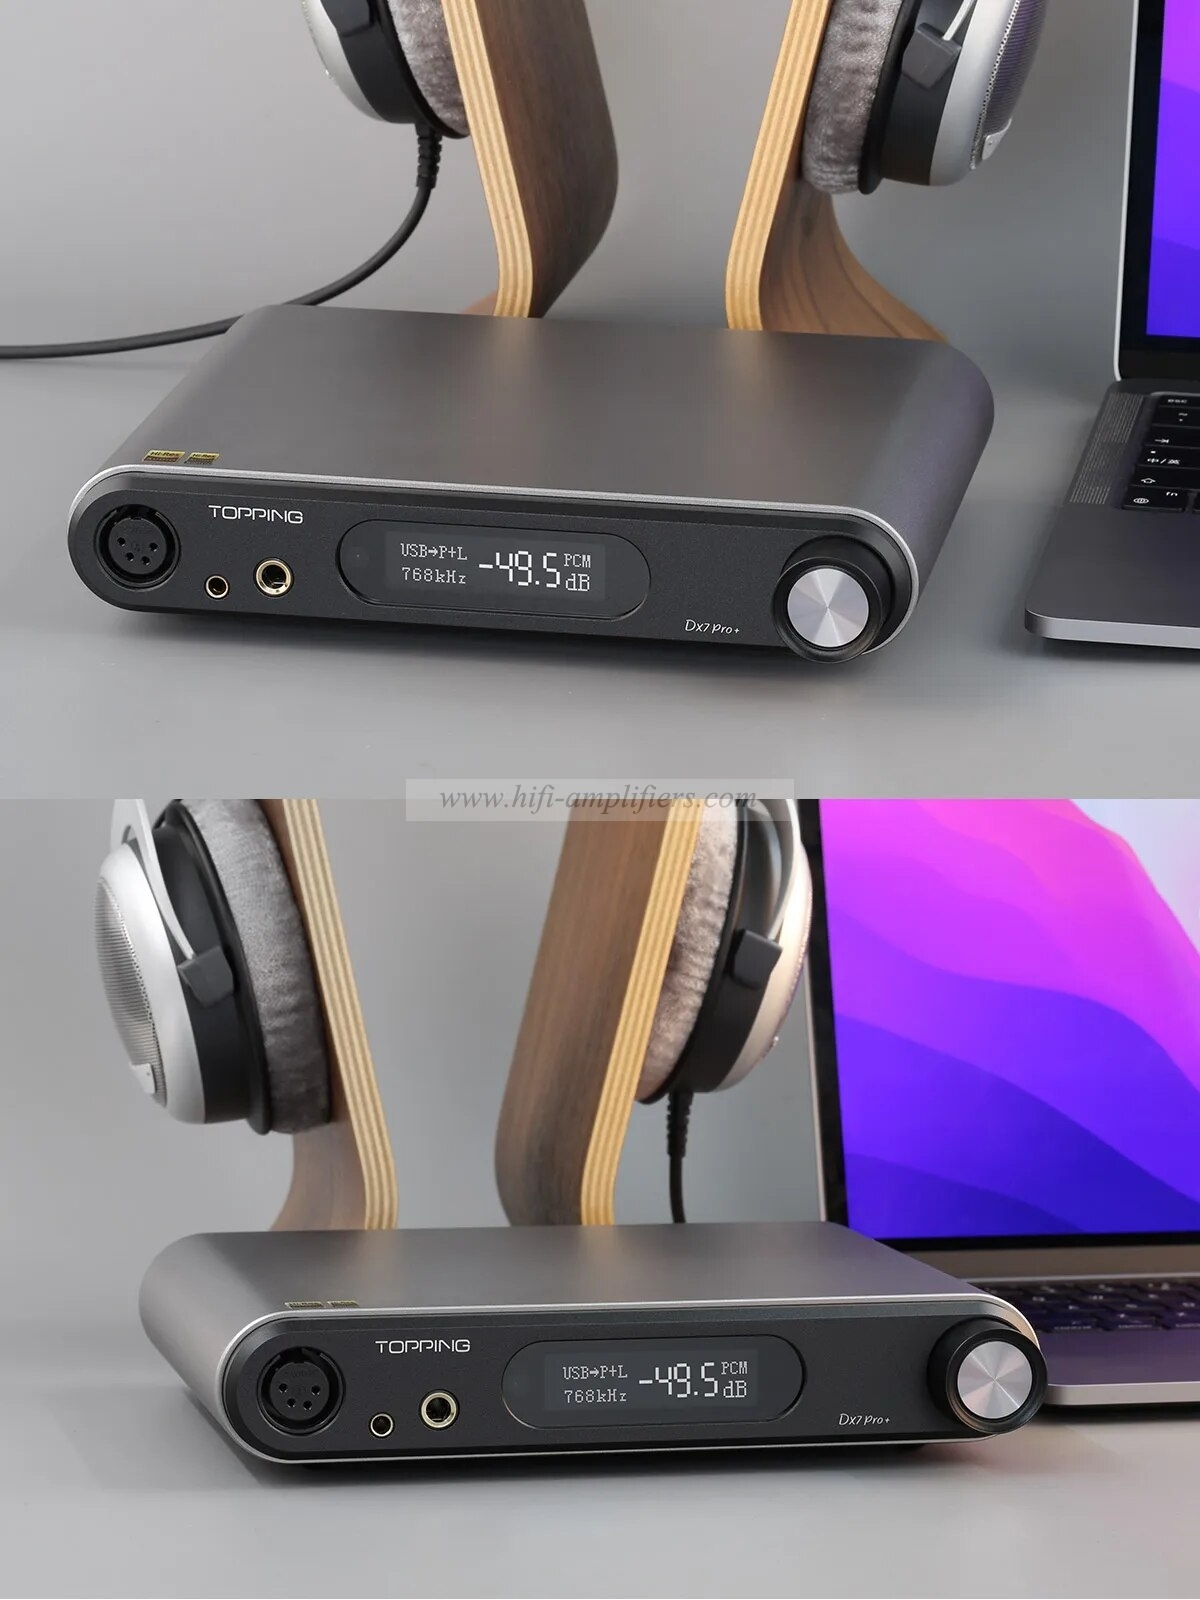 TOPPING DX7 PRO+ DAC&Headphone Amplifier LDAC Hi-Res Audio ES9038PRO Decoder Support up to DSD512&PCM768kHz